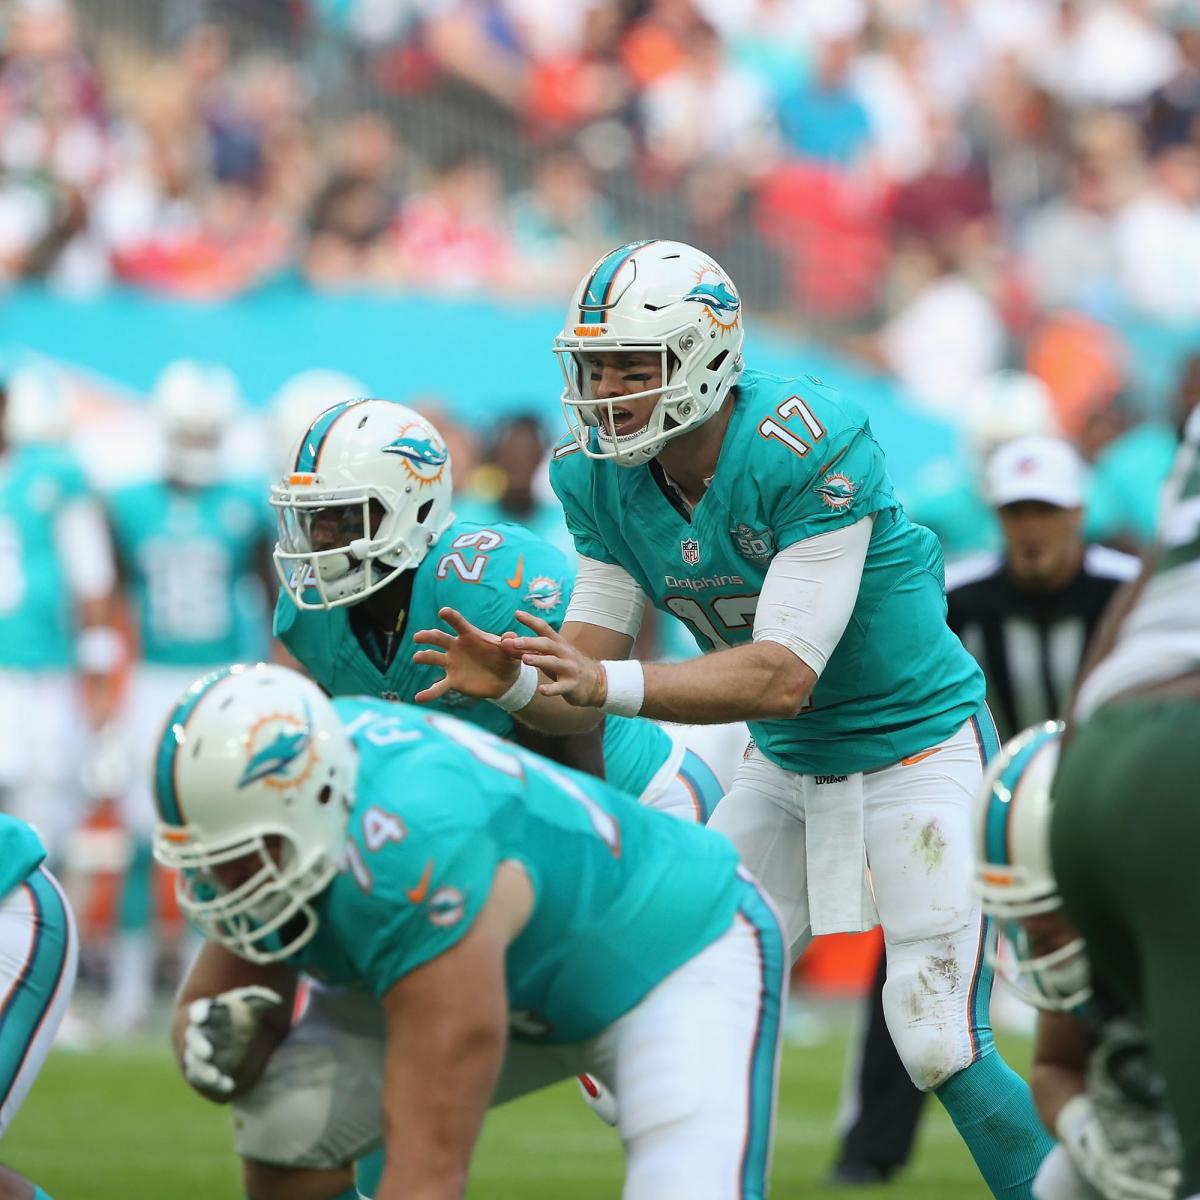 Miami Dolphins vs. New York Jets: What's the Game Plan for Miami?